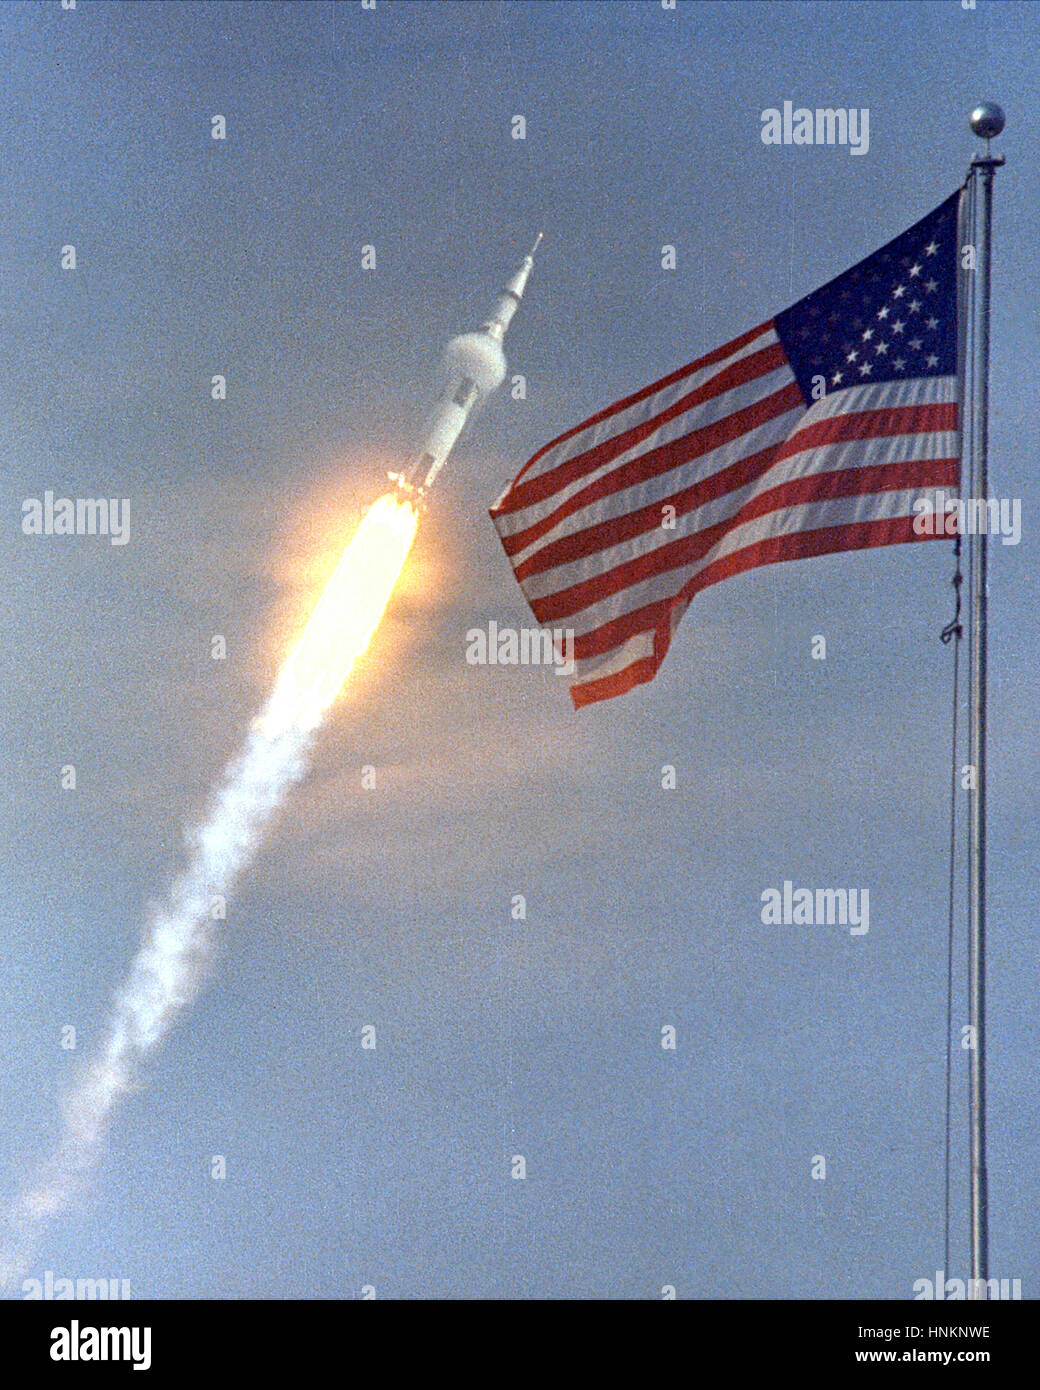 The American flag heralded the launch of Apollo 11, the first Lunar landing mission, on July 16, 1969. The massive Saturn V rocket lifted off from NASA's Kennedy Space Center with astronauts Neil A. Armstrong, Michael Collins, and Edwin 'Buzz' Aldrin at 9:32 a.m. EDT. Four days later, on July 20, Armstrong and Aldrin landed on the Moon's surface while Collins orbited overhead in the Command Module. Armstrong and Aldrin gathered samples of lunar material and deployed scientific experiments that transmitted data about the lunar environment.  Image Credit: NASA Stock Photo